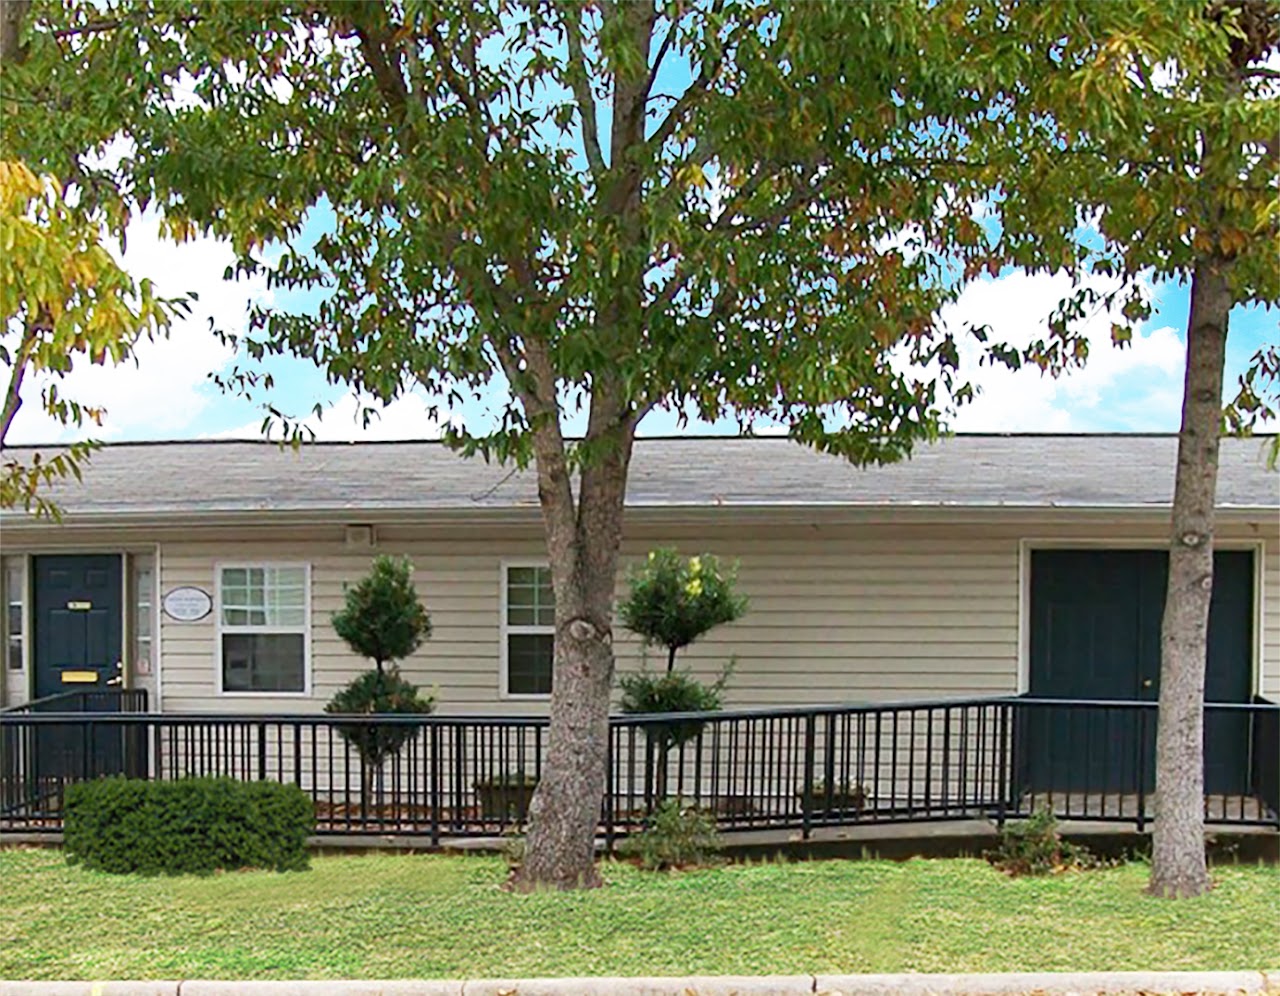 Photo of FAIRVIEW APARTMENTS. Affordable housing located at 300 AVENUE F THOMASTON, GA 30286